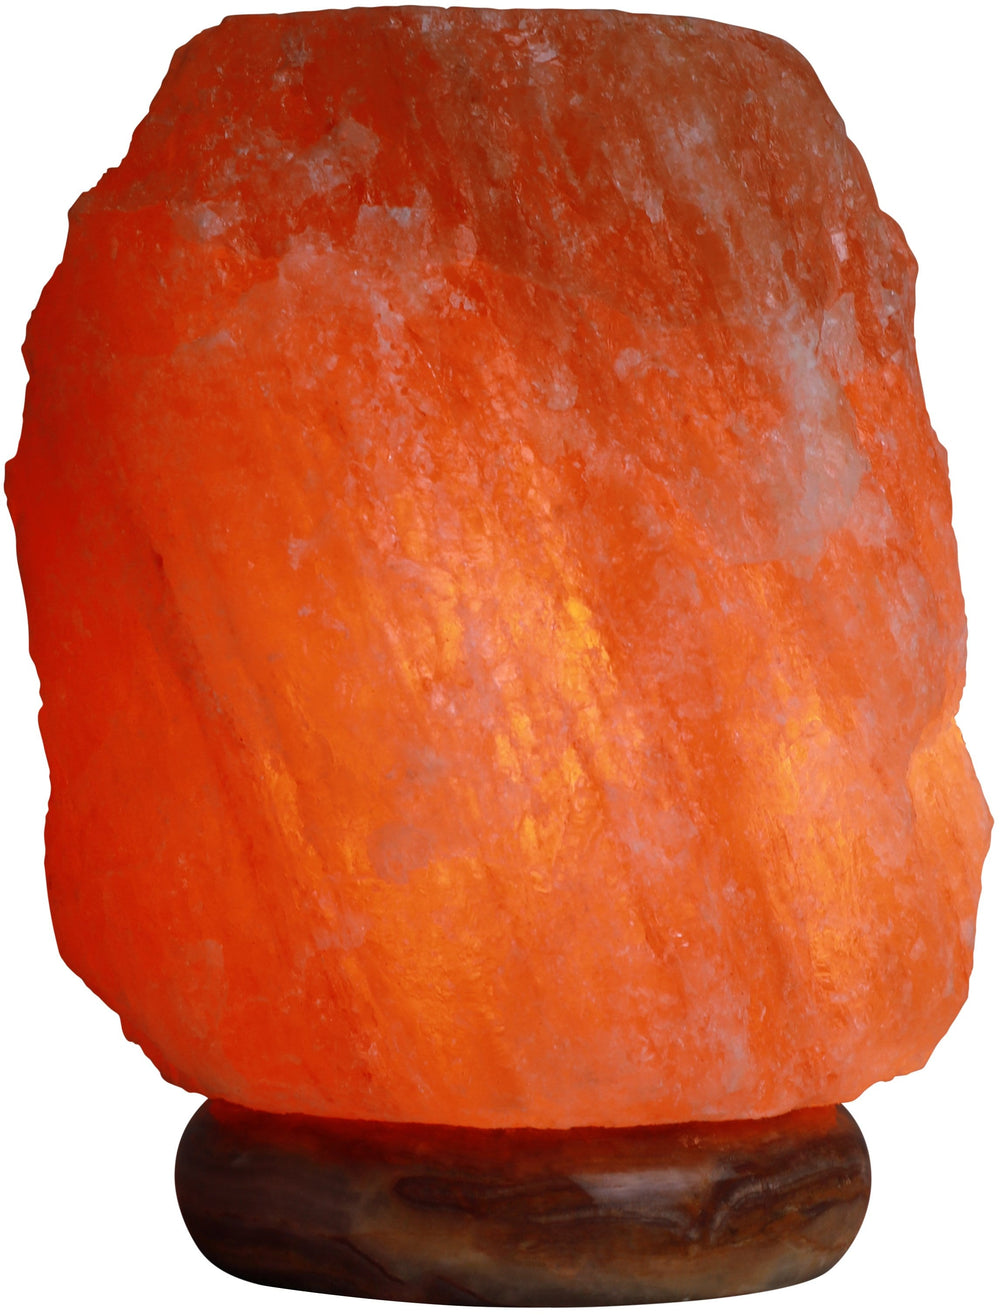 Himalayan Rock Salt Natural Oil Heating Lamp, 7 Inch Tall - Soft Calm Therapeutic Light - Naturally Salt Crystal On Onyx Marble Base - Table Oil Diffuser, Dark Orange Hue